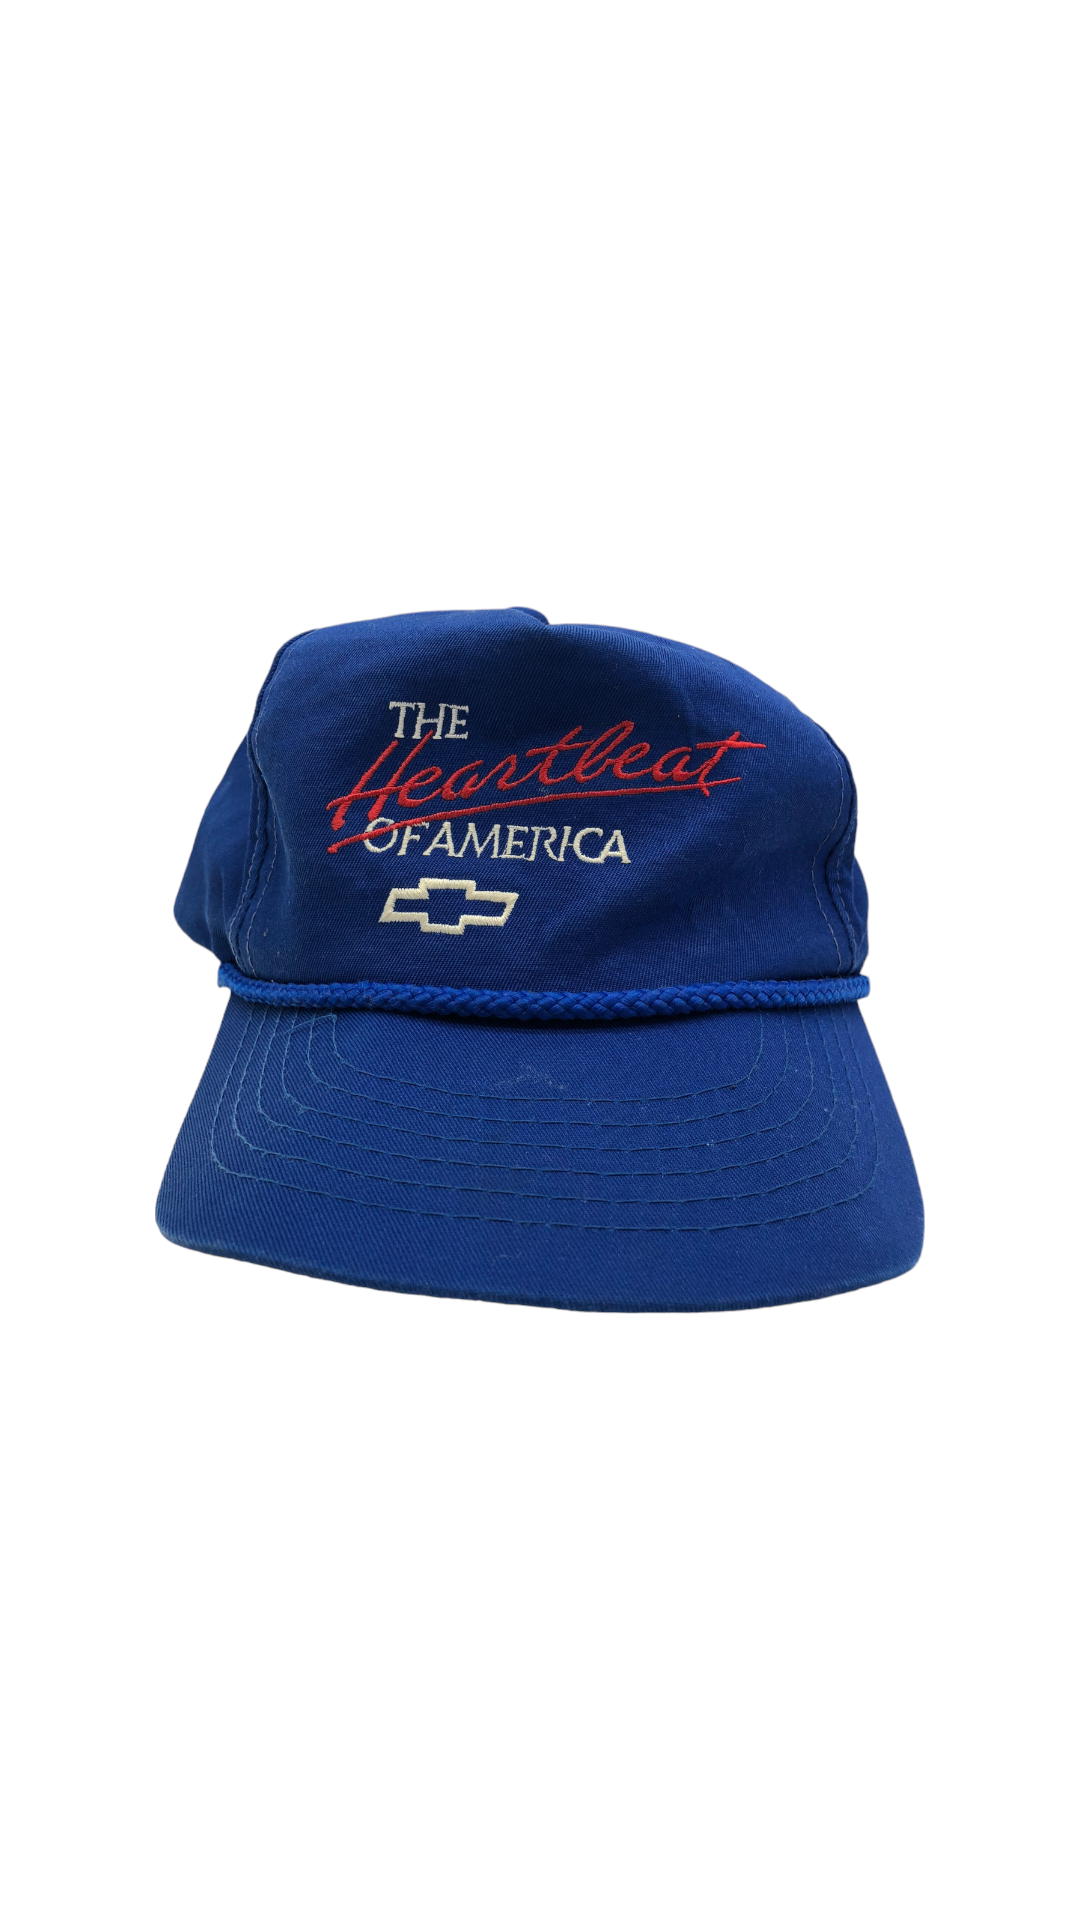 VTG Chevy The Heartbeat of America Hat